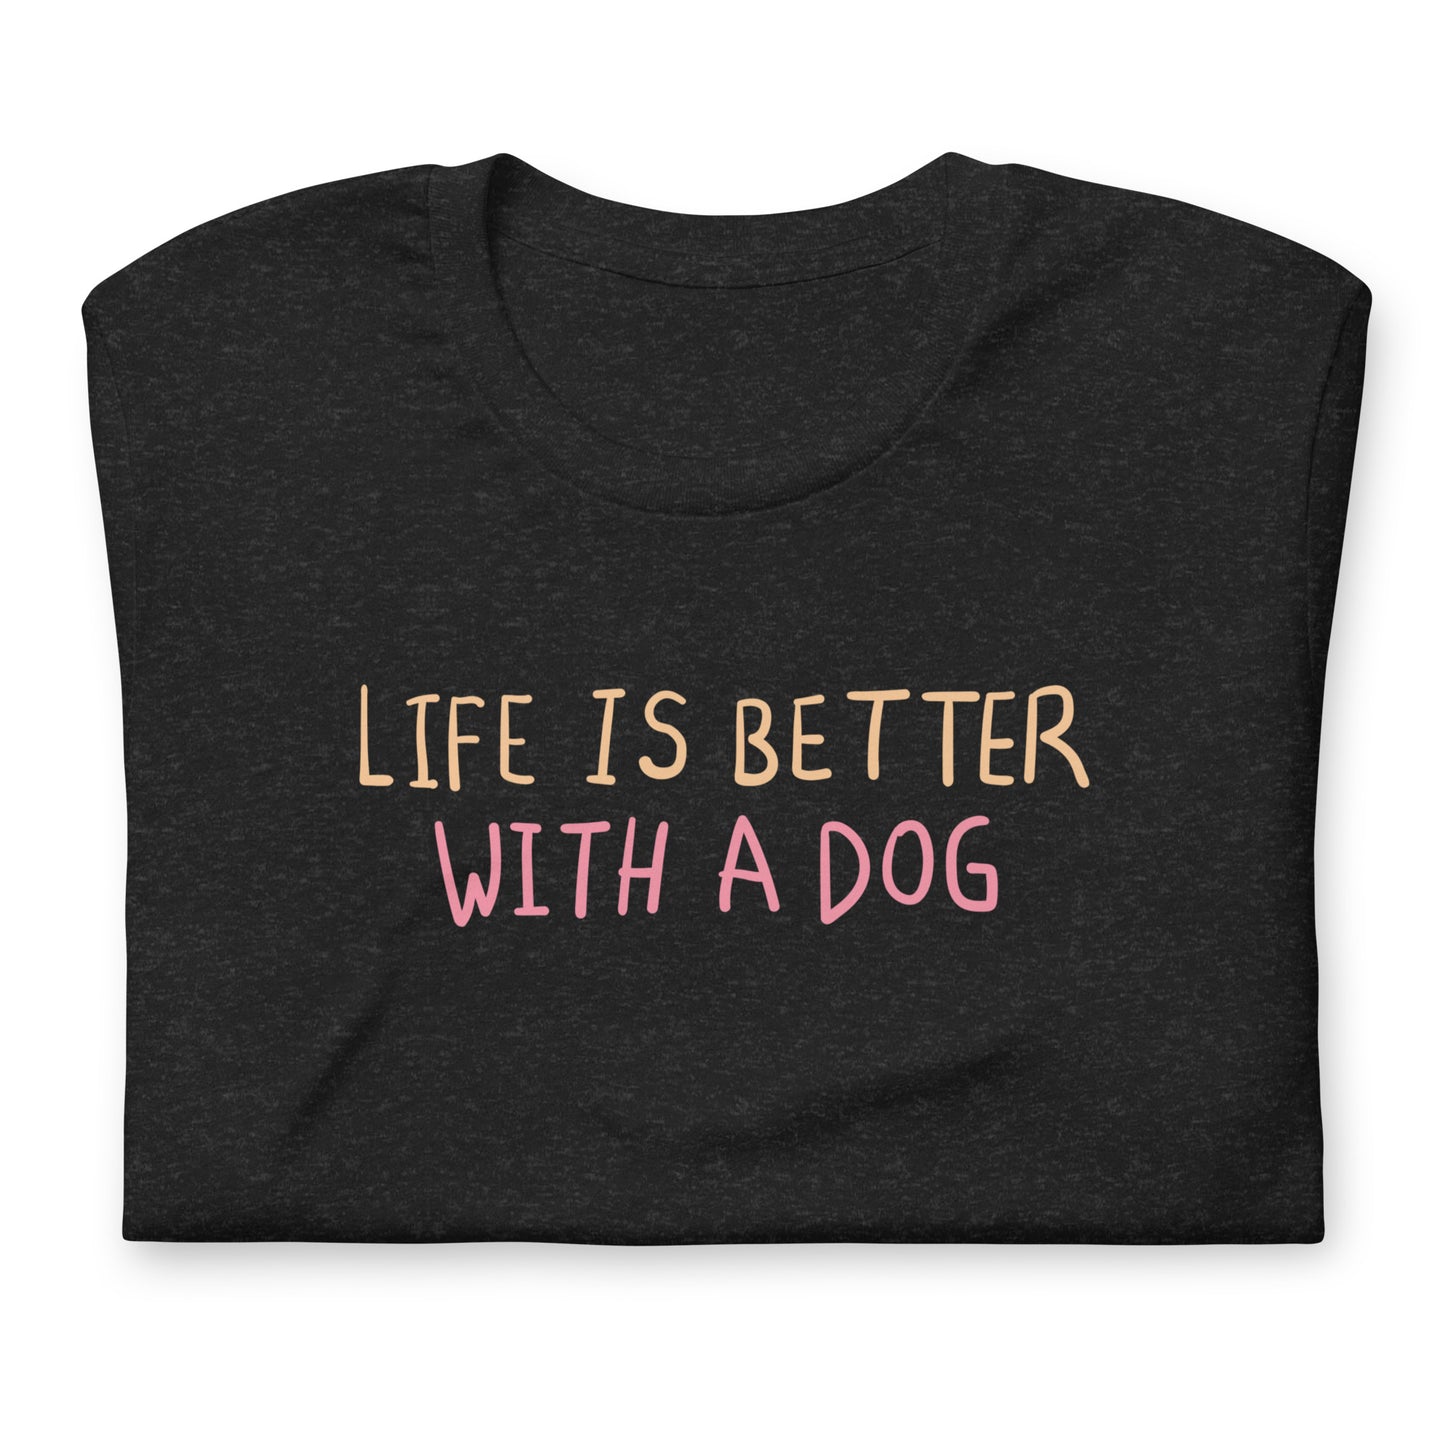 "Life is Better with a Dog" T-Shirt - Unisex Dog Lover Tee - Pet Owner Gift - Soft Cotton Animal Shirt - Casual Canine Top